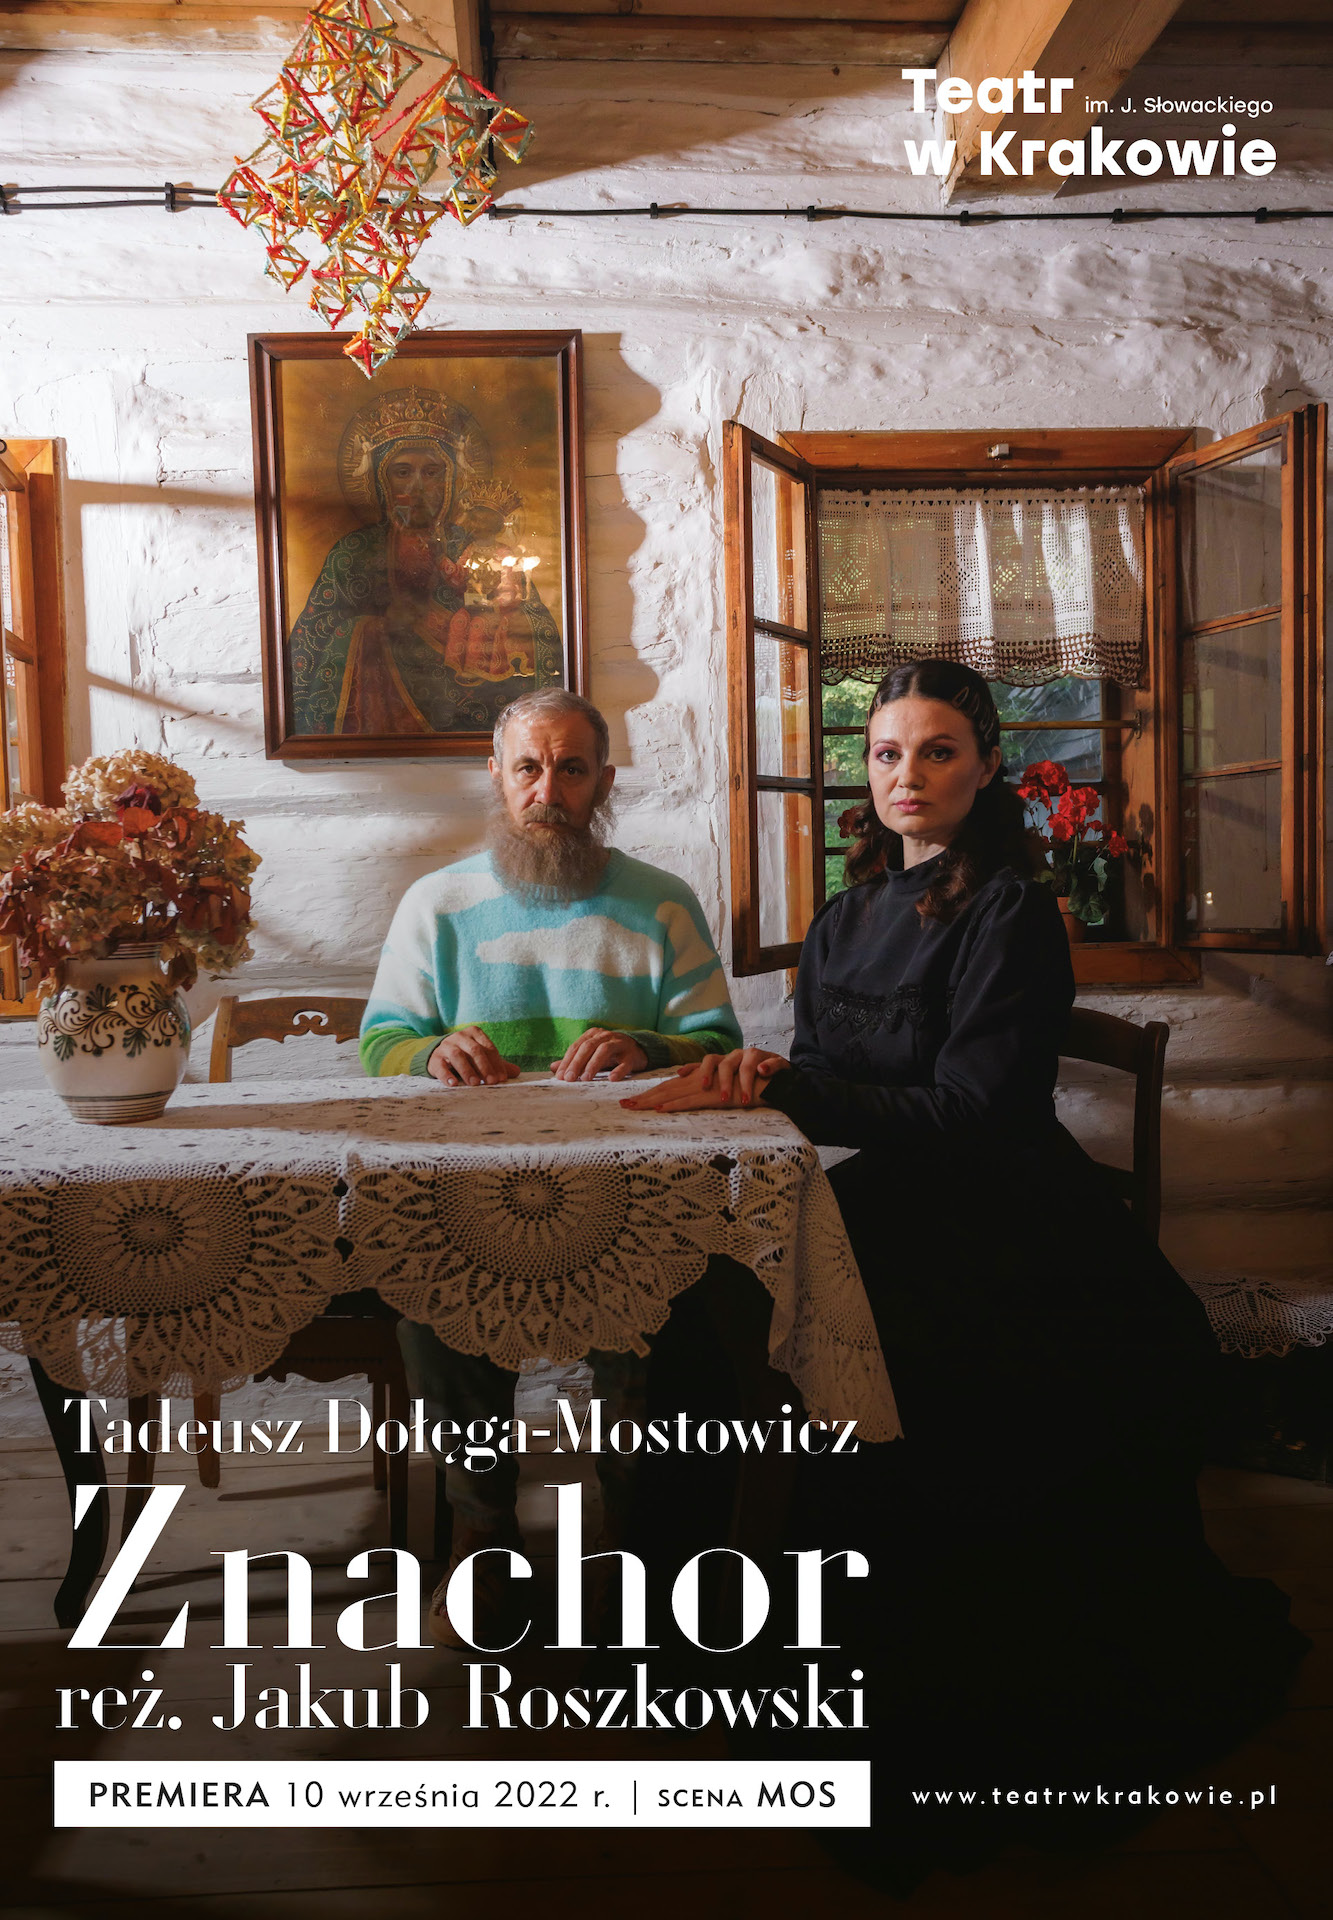 Cracow. The cult “Znachor” in a theatrical adaptation